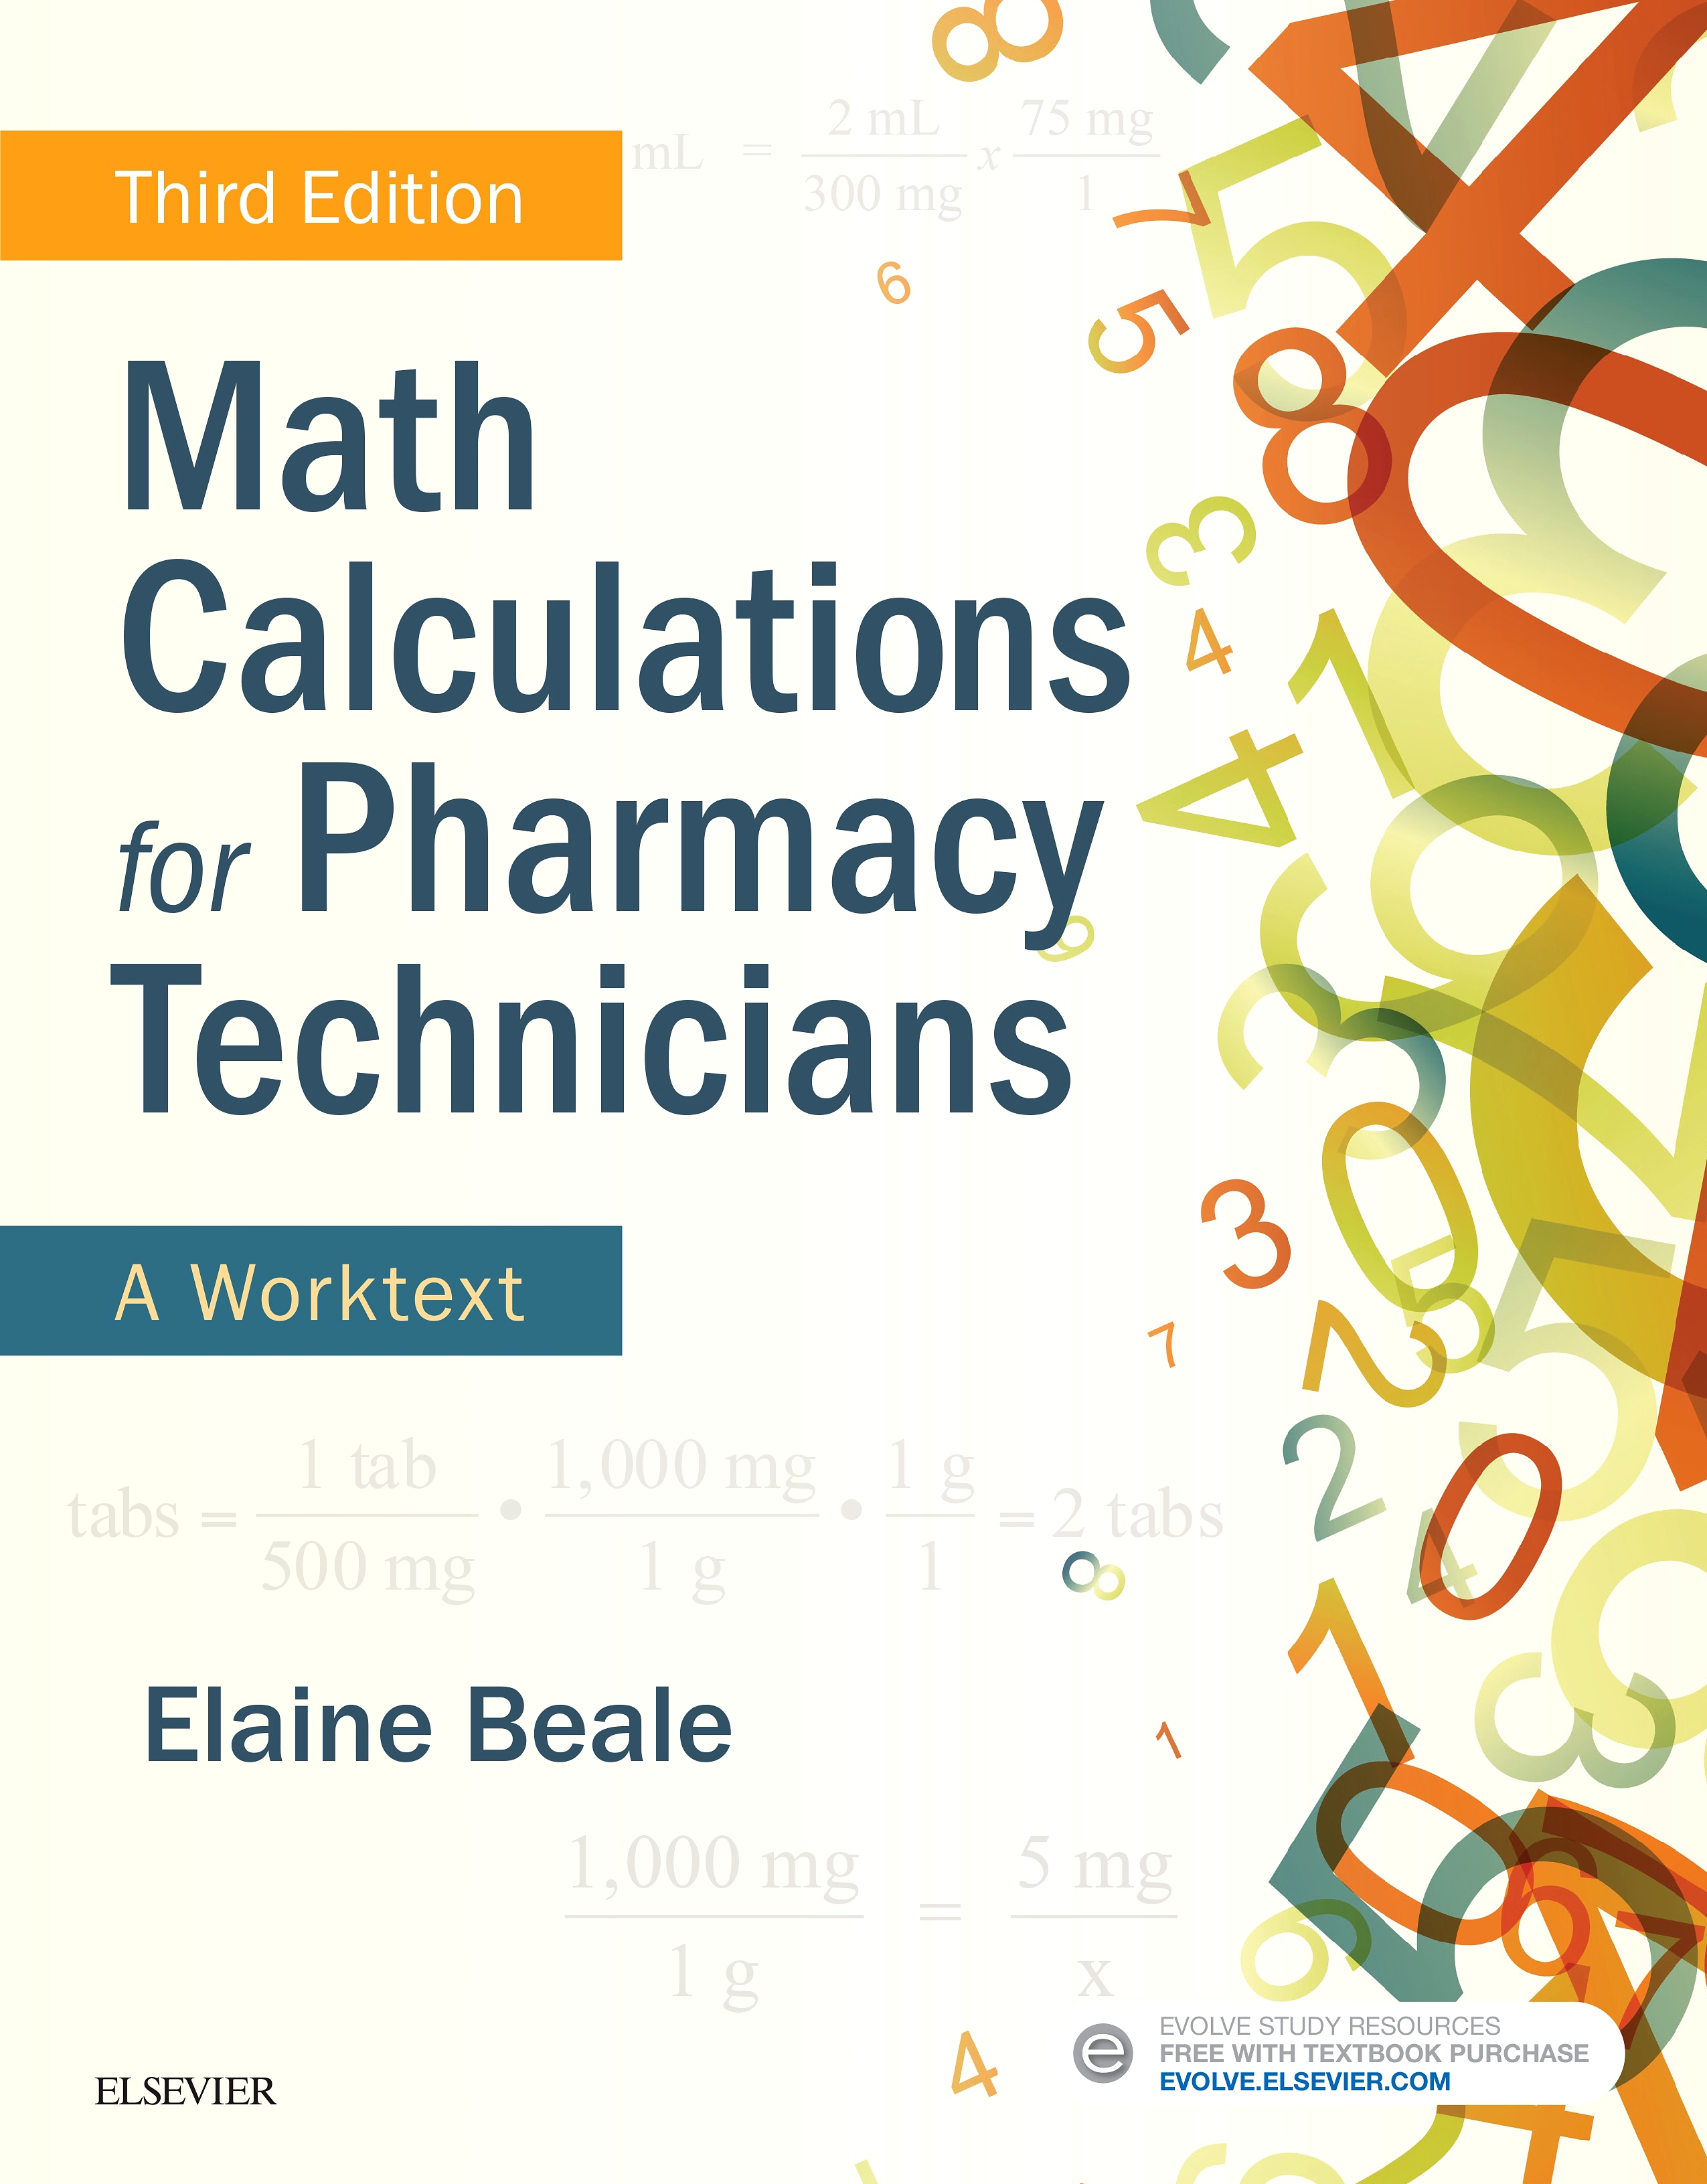 Evolve Resources for Math Calculations for Pharmacy Technicians, 3rd